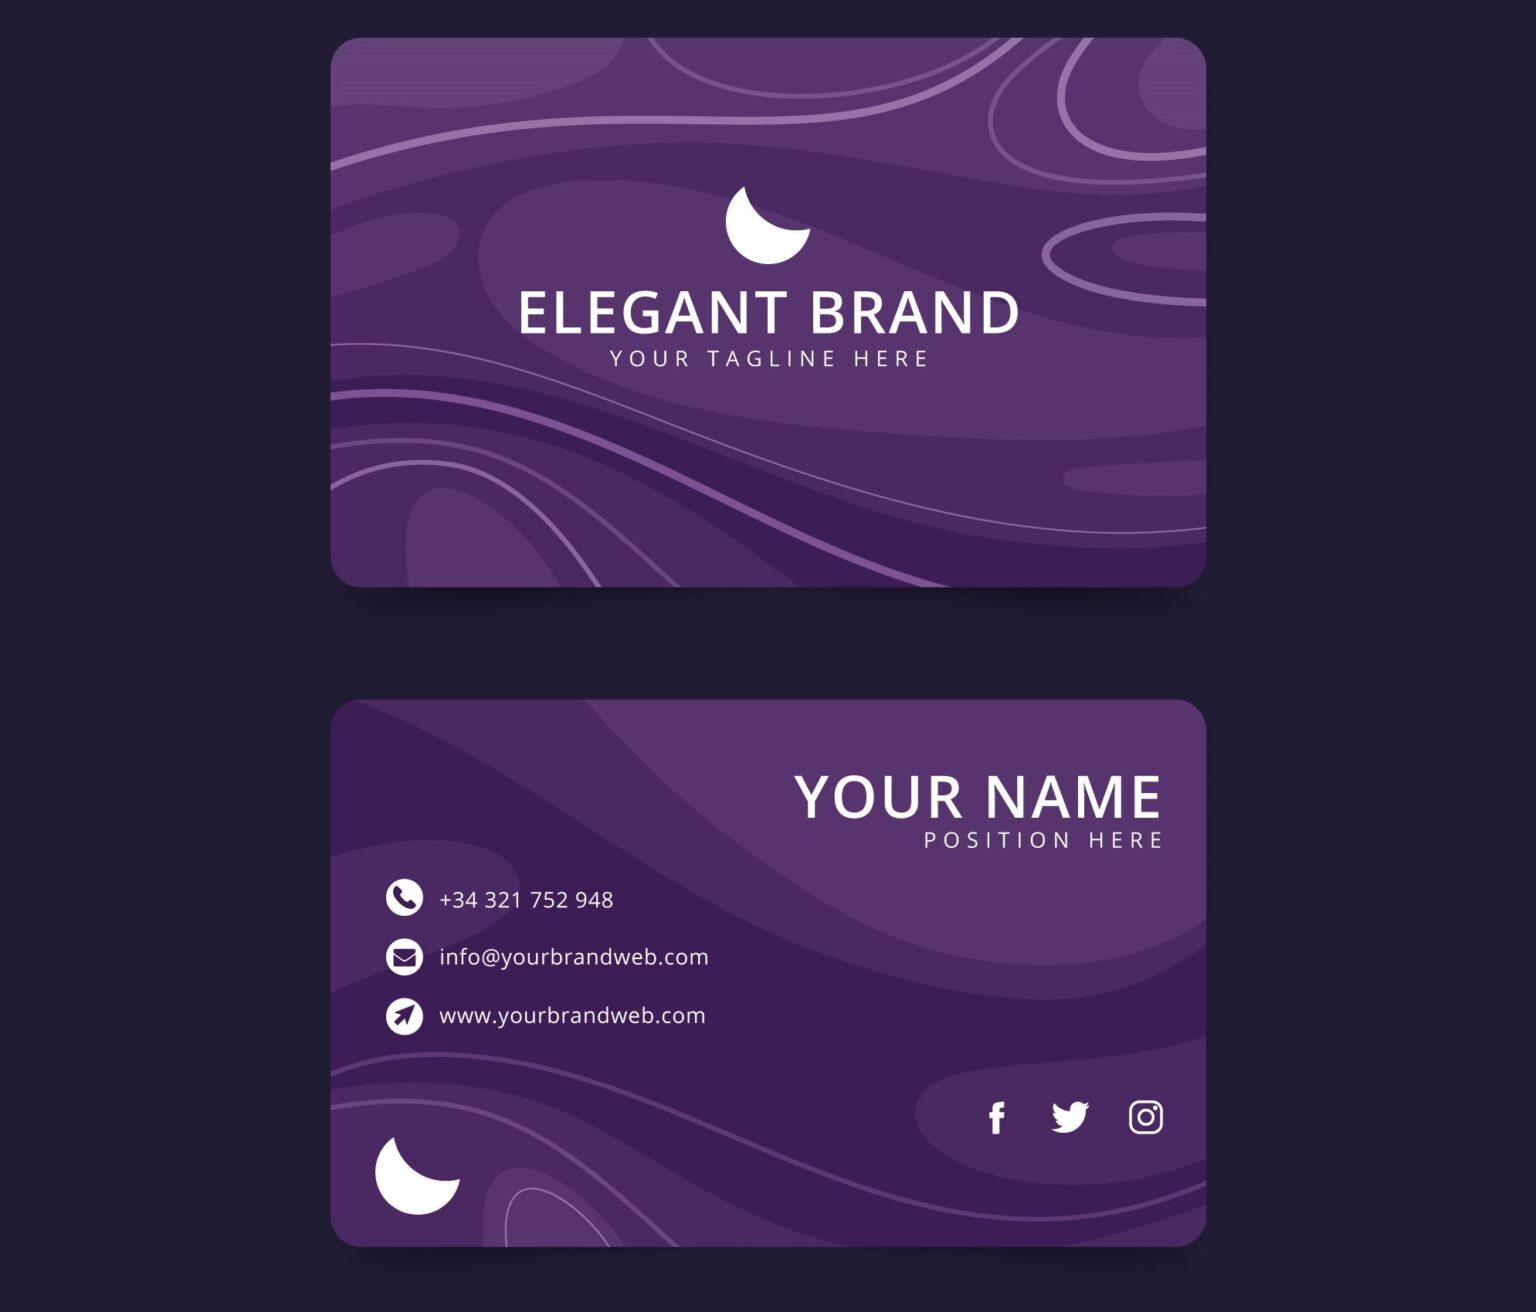 Social Media Icons for Business Cards A Complete Guide